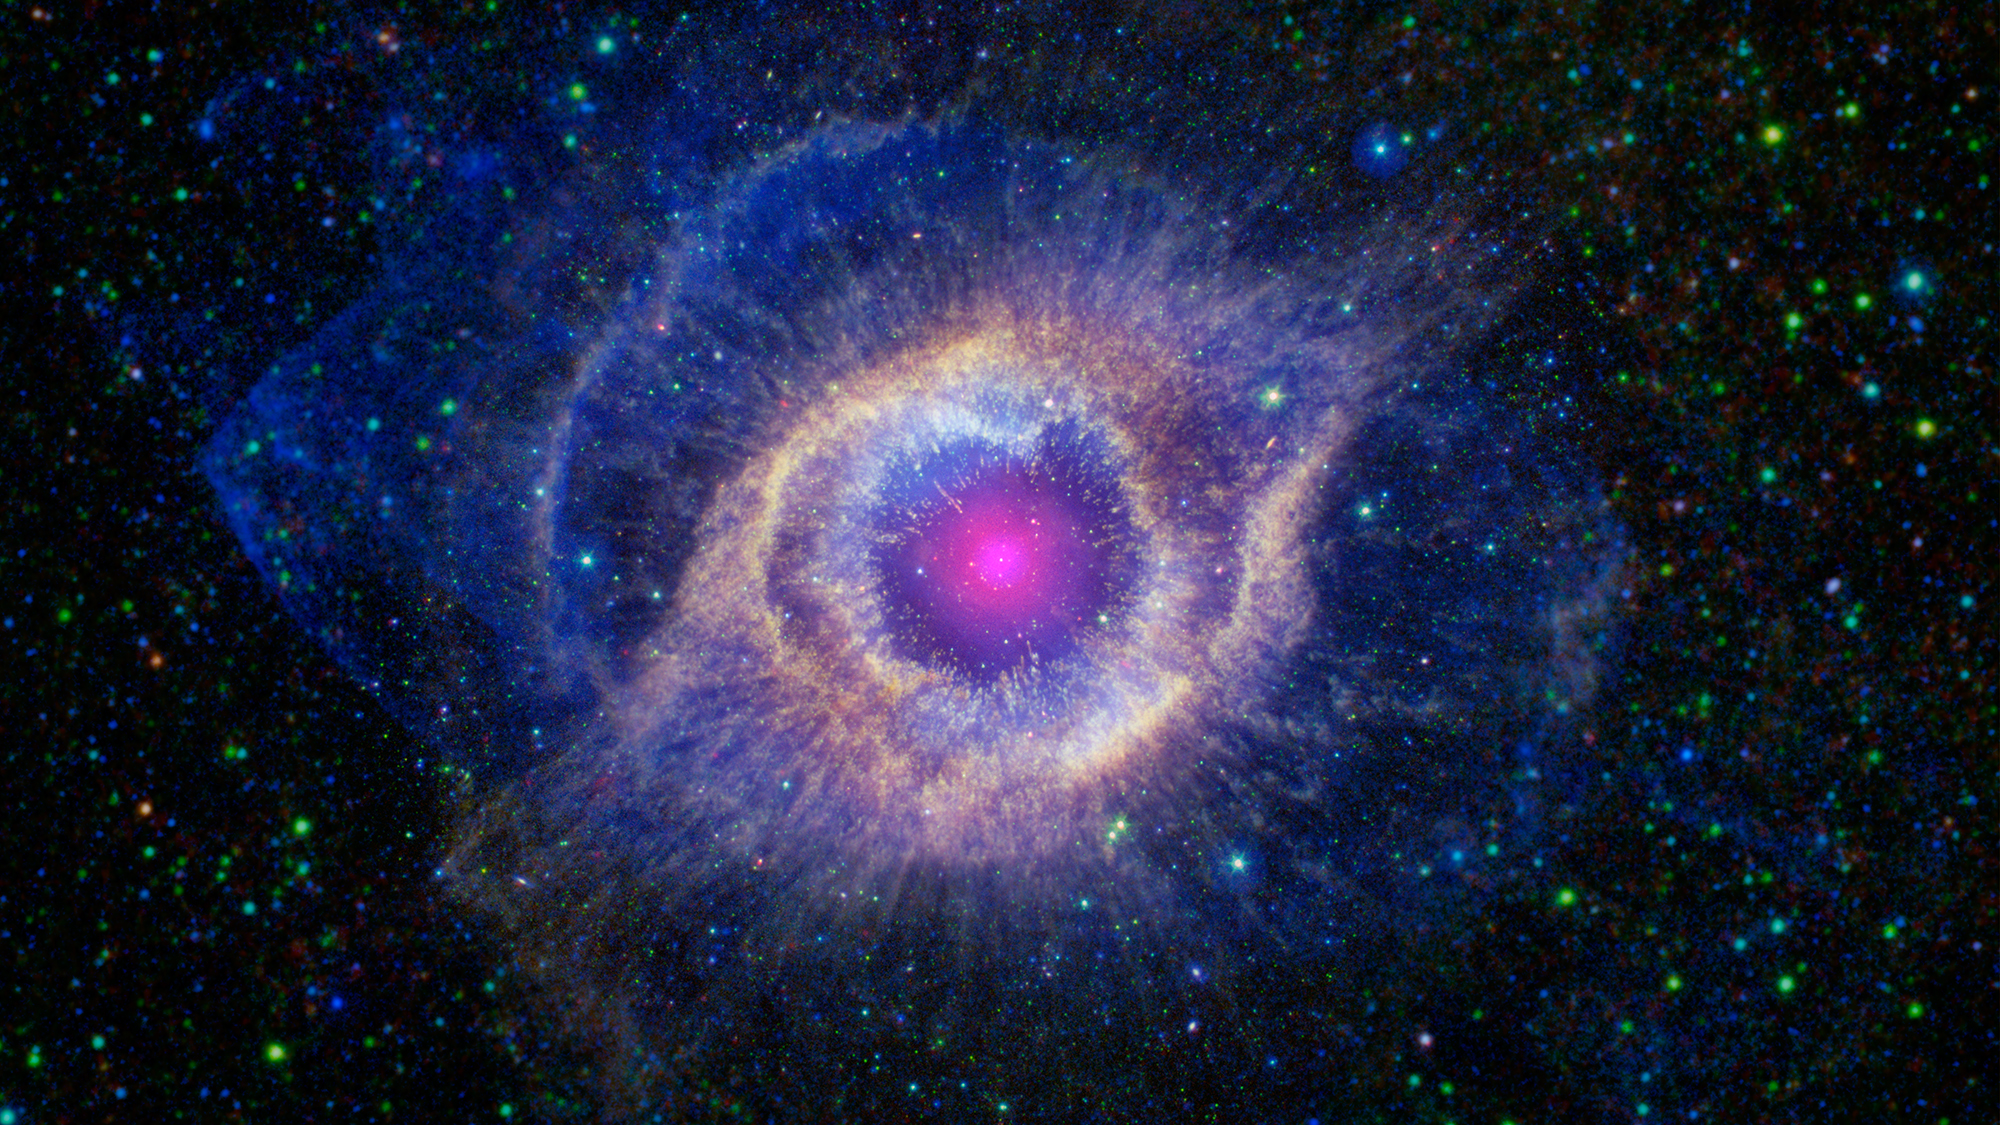 In about 5 billion years, our Sun will run out of fuel and expand, possibly engulfing Earth. These end stages of a star’s life can be utterly beautiful as is the case with this planetary nebula called the Helix Nebula. Astronomers study these objects by looking at all kinds of light, including X-rays that the Chandra X-ray Observatory sees.